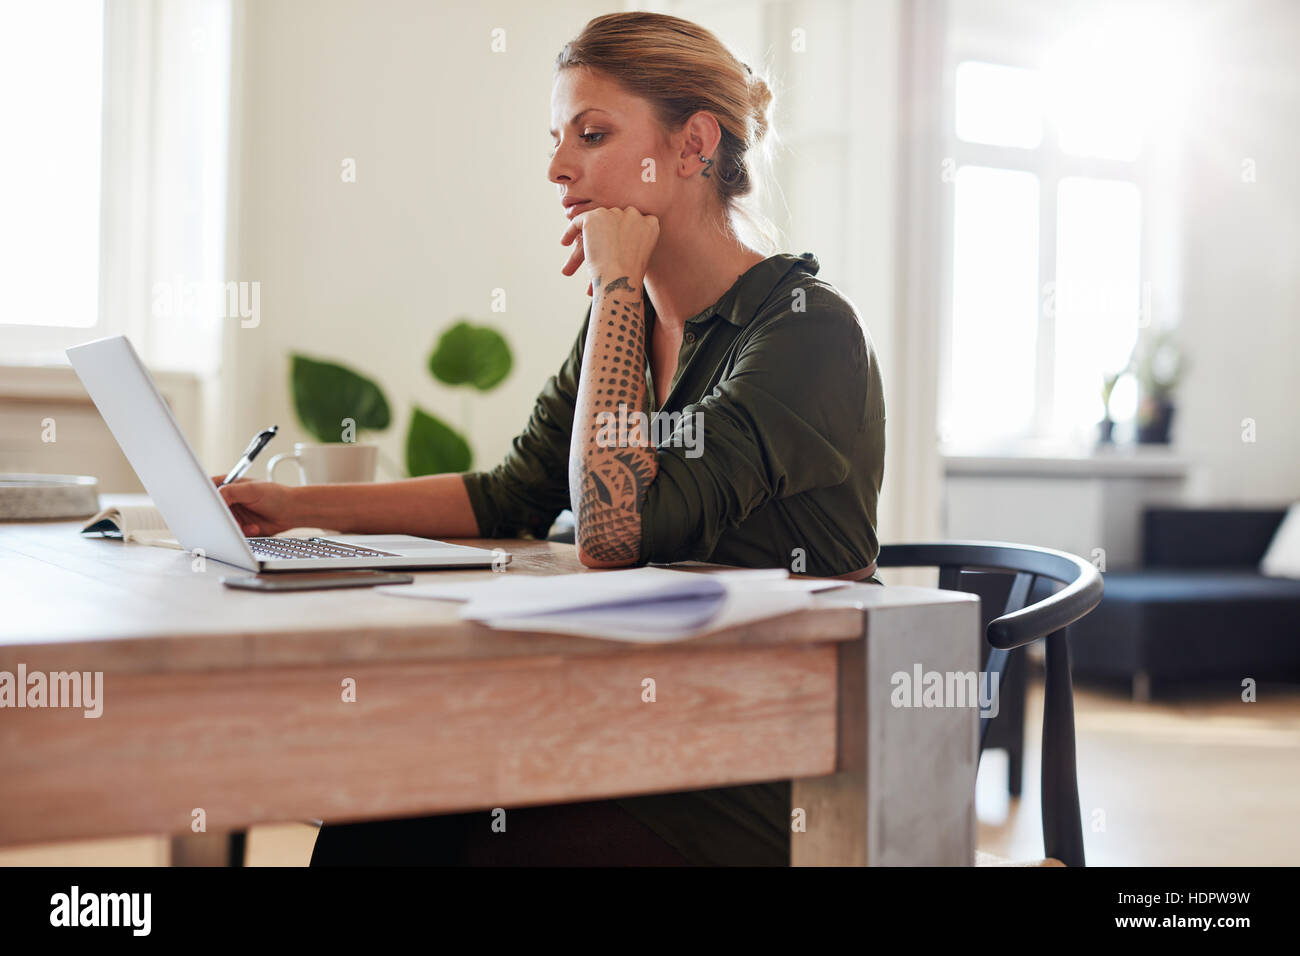 Side view shot of young woman working on laptop at home office. Caucasian female sitting at table using laptop. Stock Photo